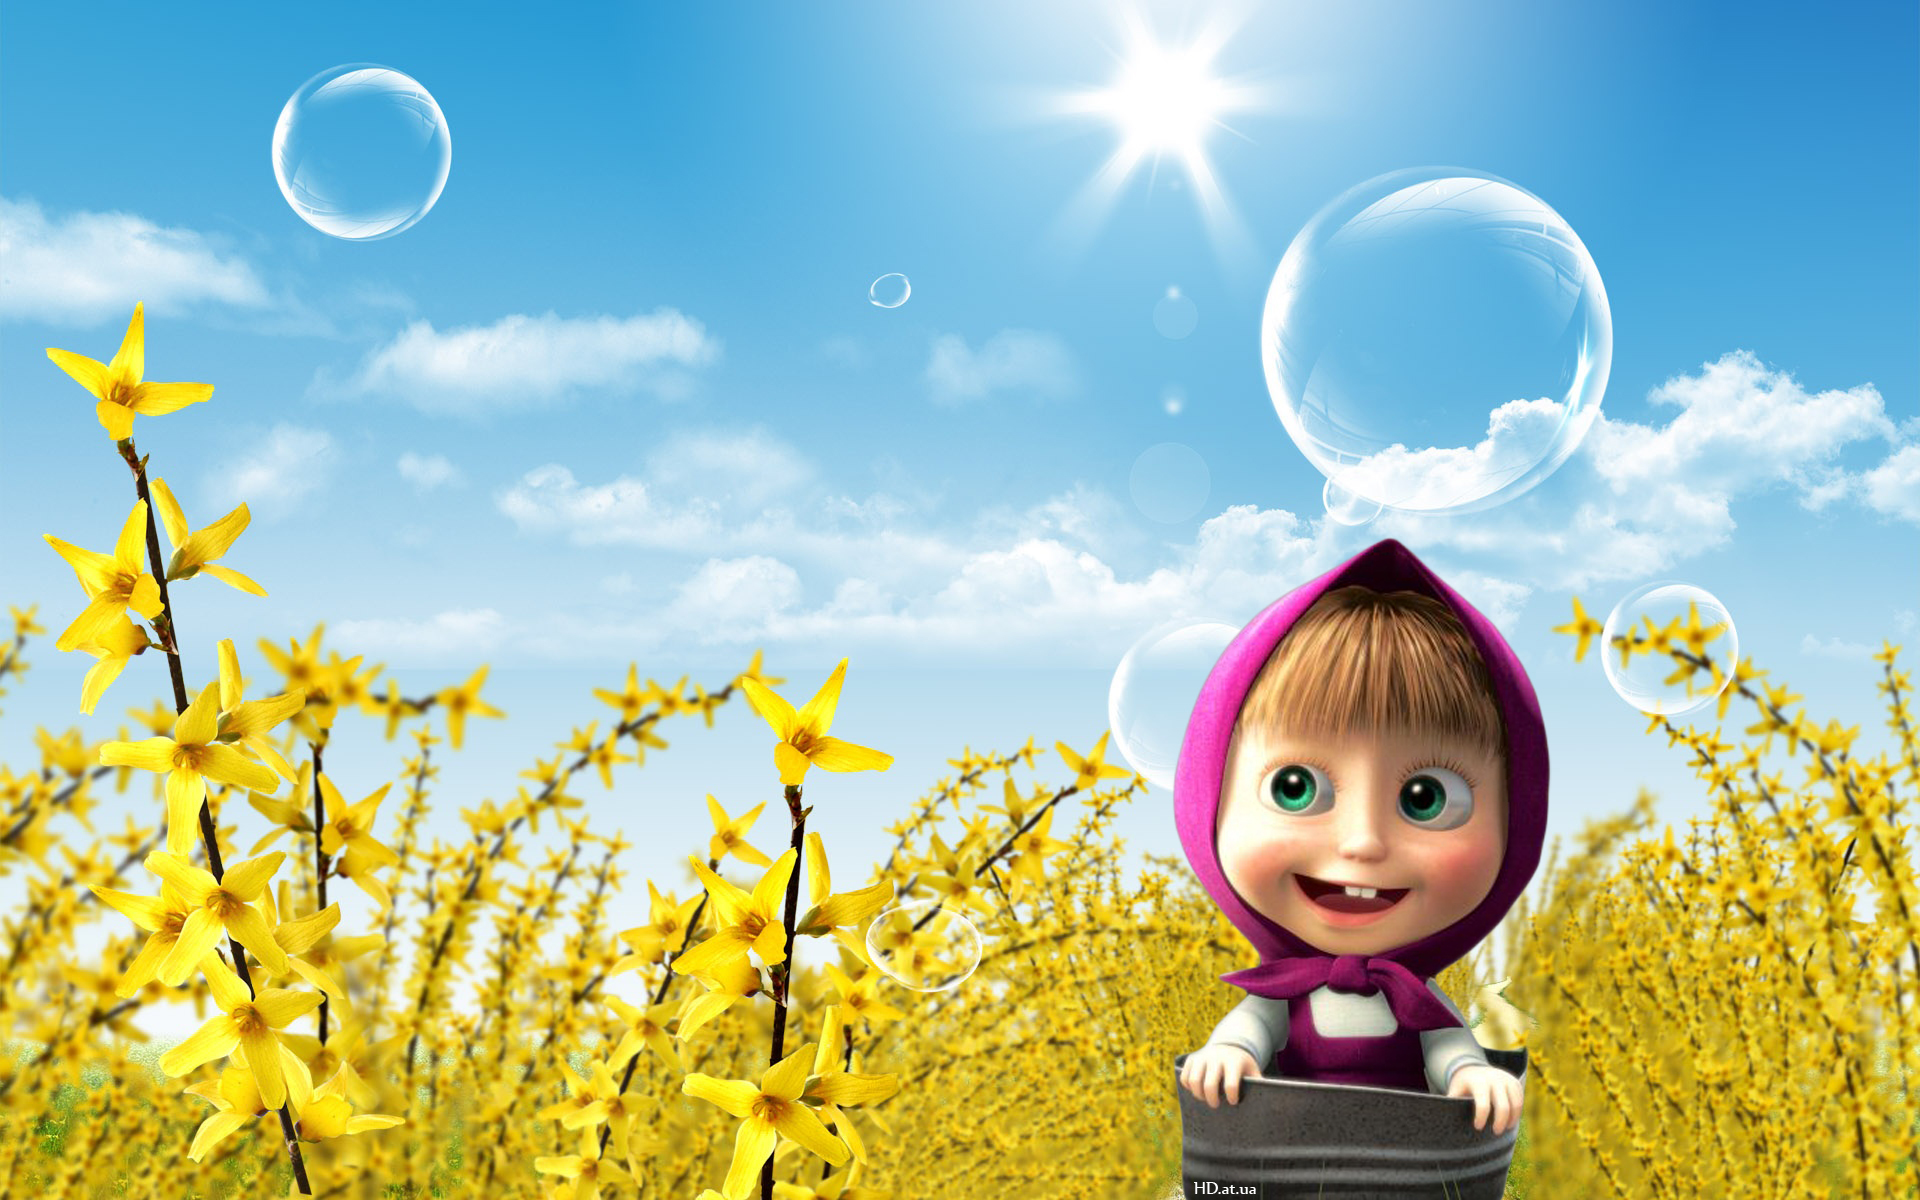 Mobile wallpaper: Sun, Masha And The Bear, Children, Cartoon, 13865 download  the picture for free.